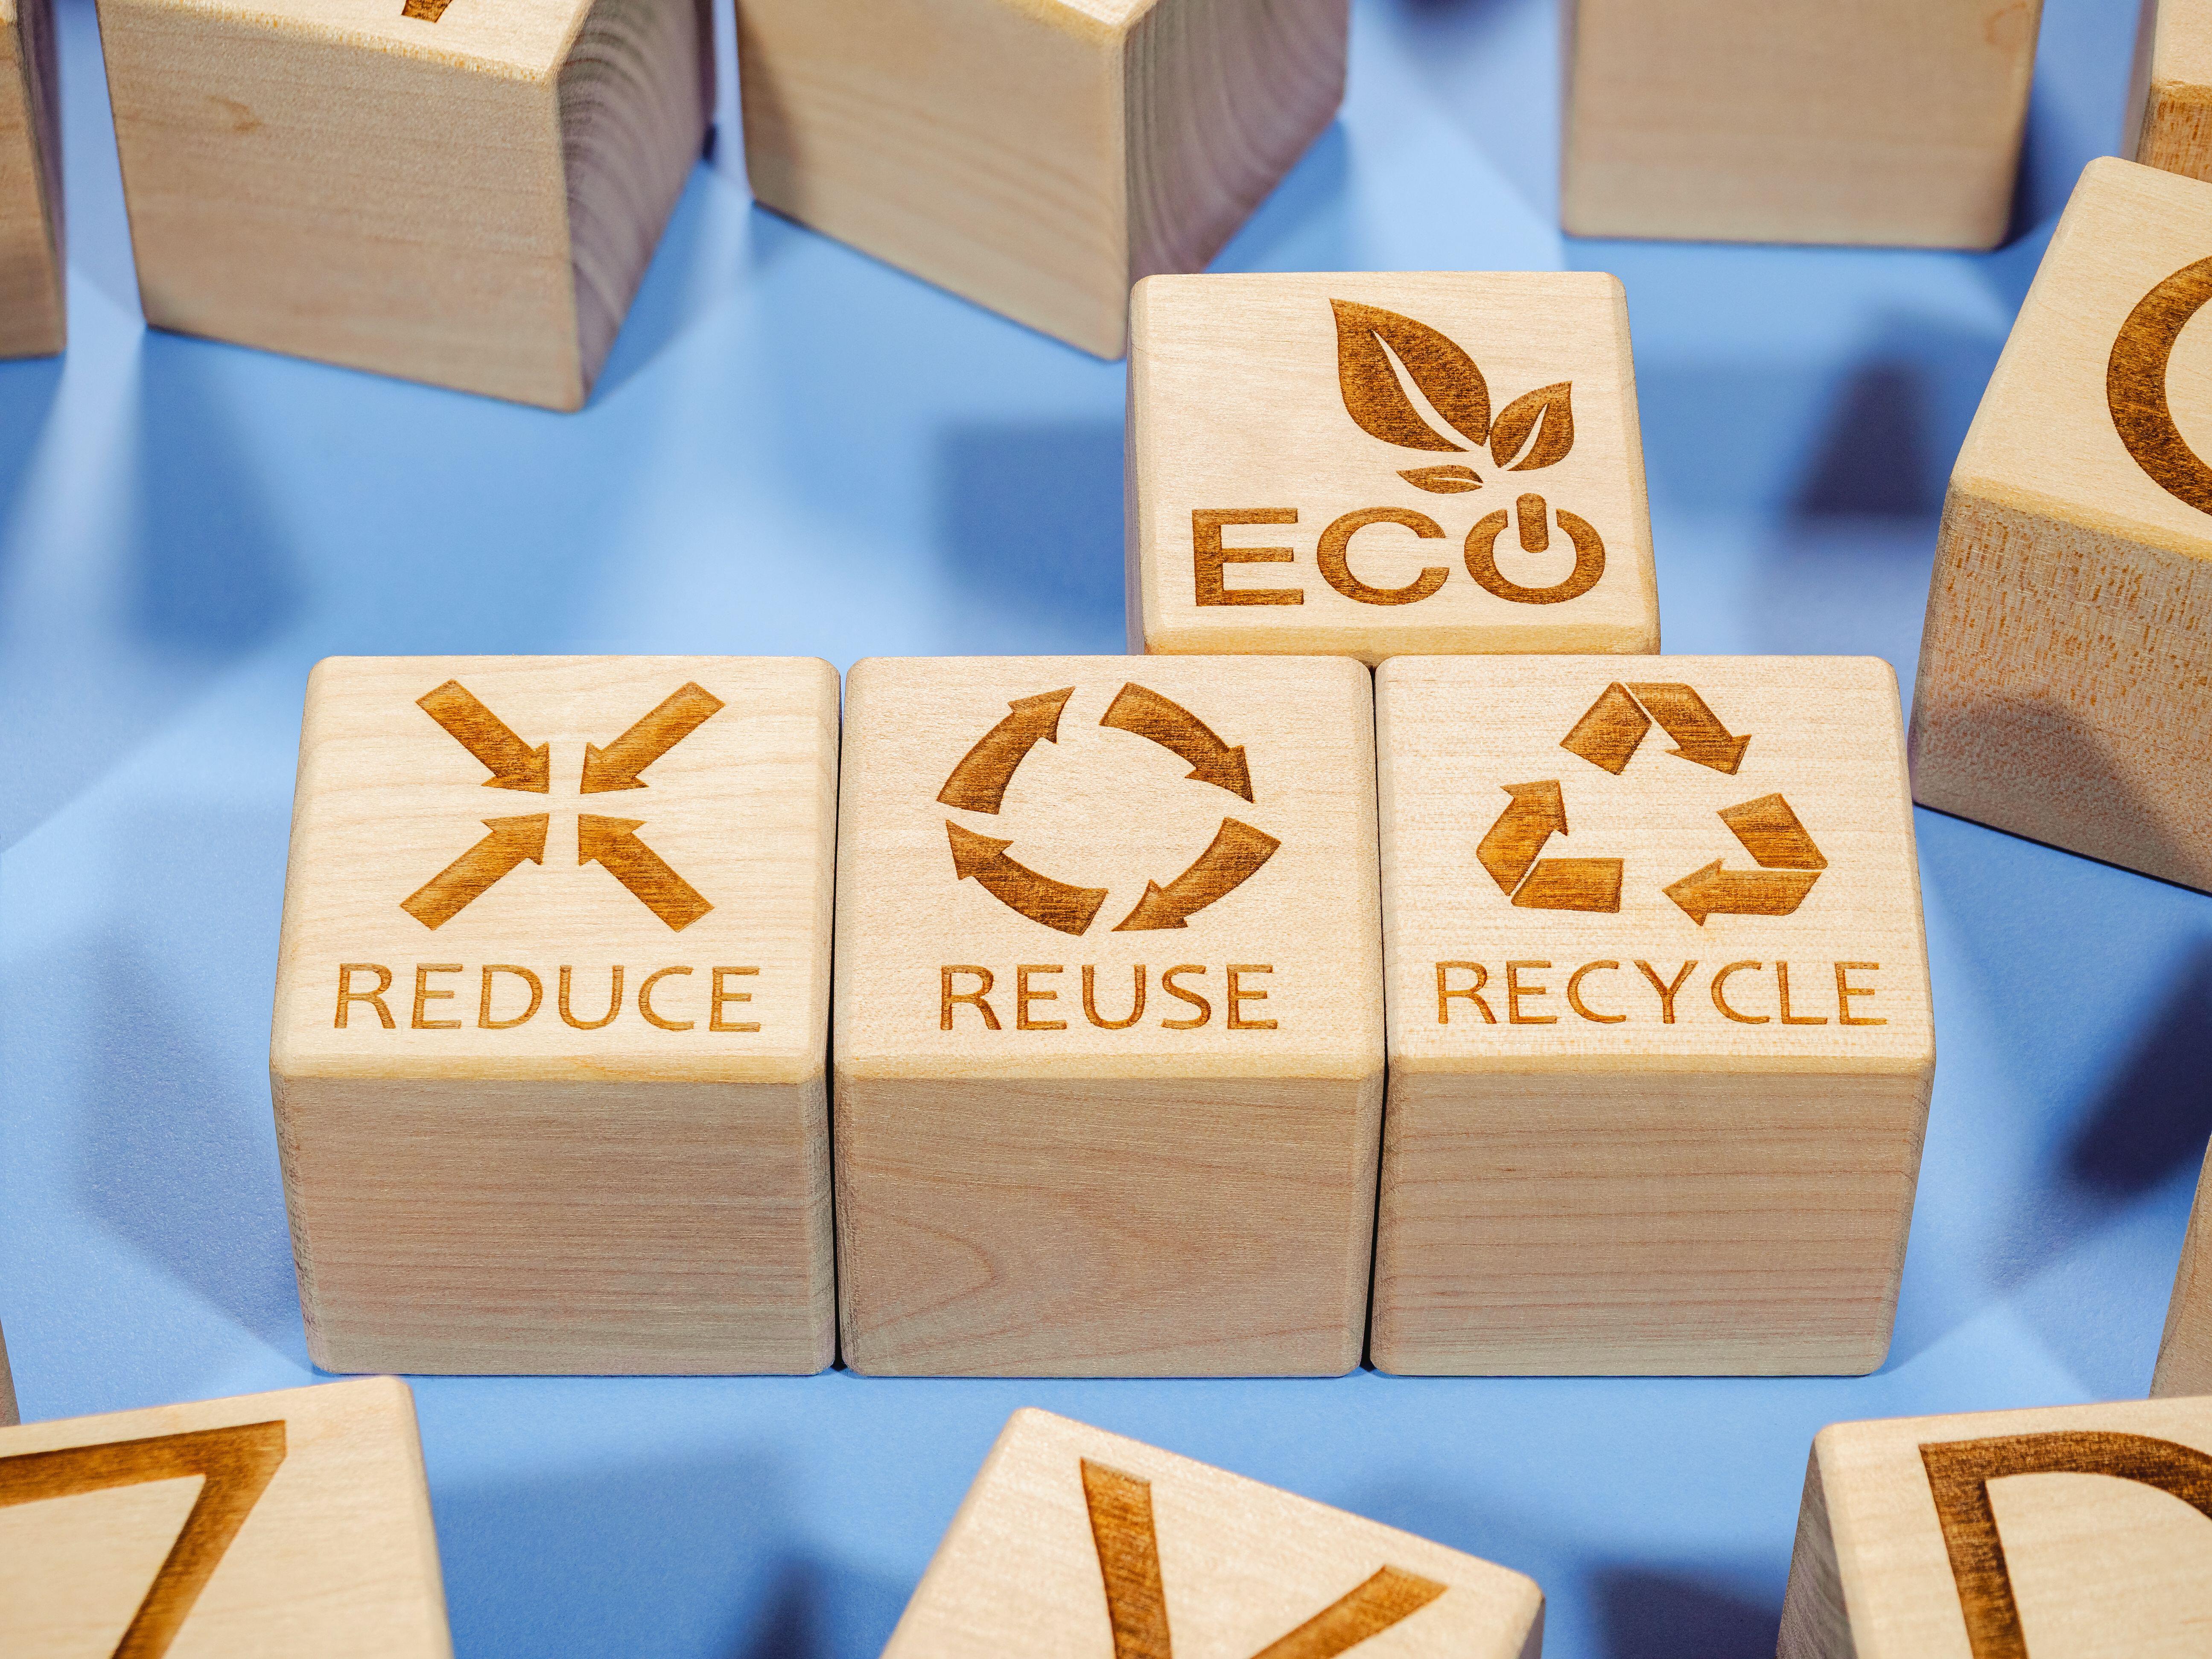 A symbolic depiction of a slogan aimed an encouraging carbon reduction and sustainability: three wooden building blocks are lined up to spell out "reduce" reuse and recycle; above these is a block labelled "Eco".